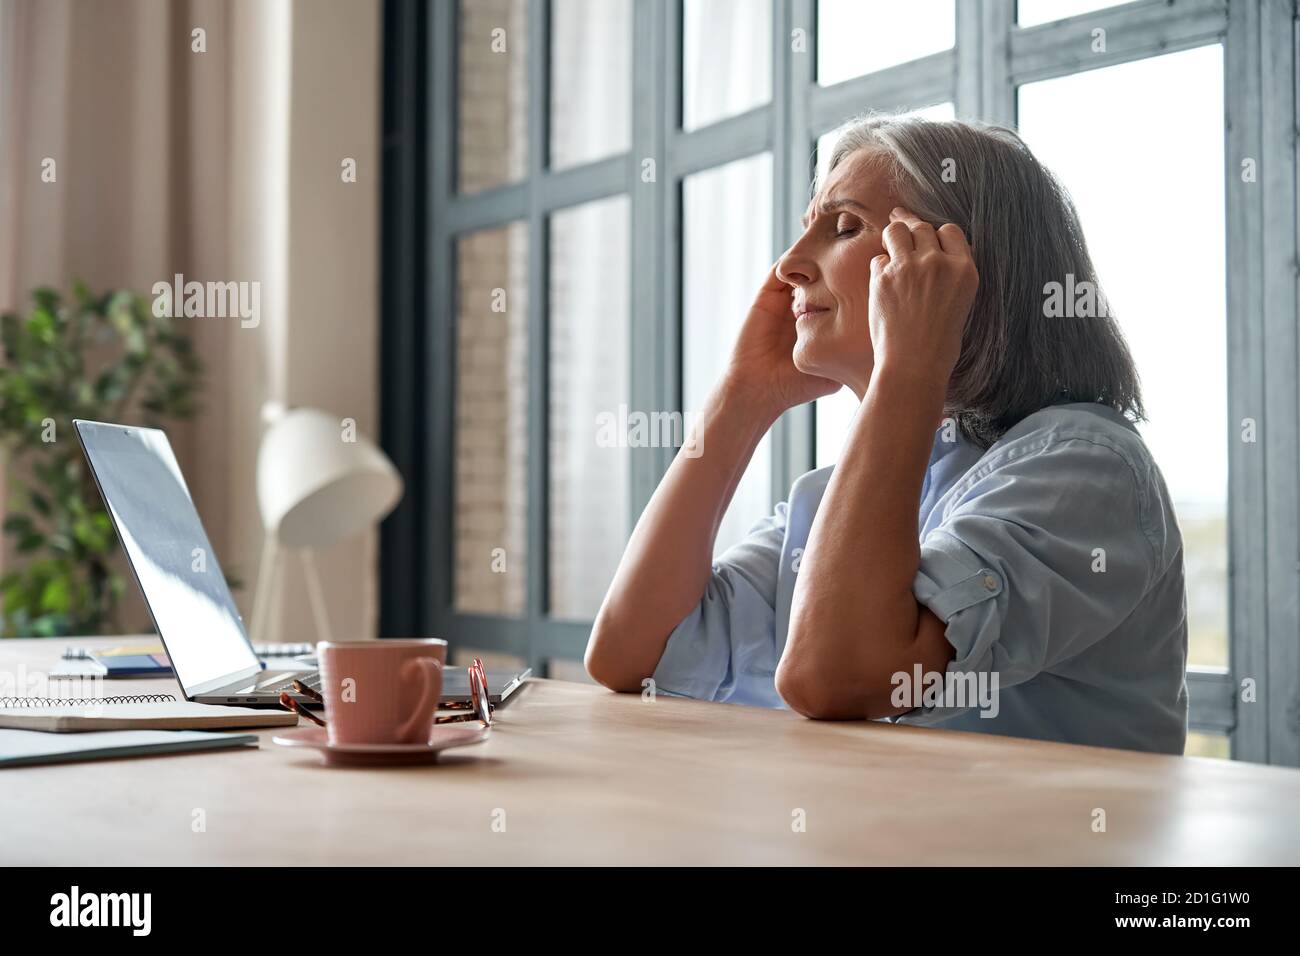 Stressed overworked old mature business woman suffering from headache at work. Stock Photo